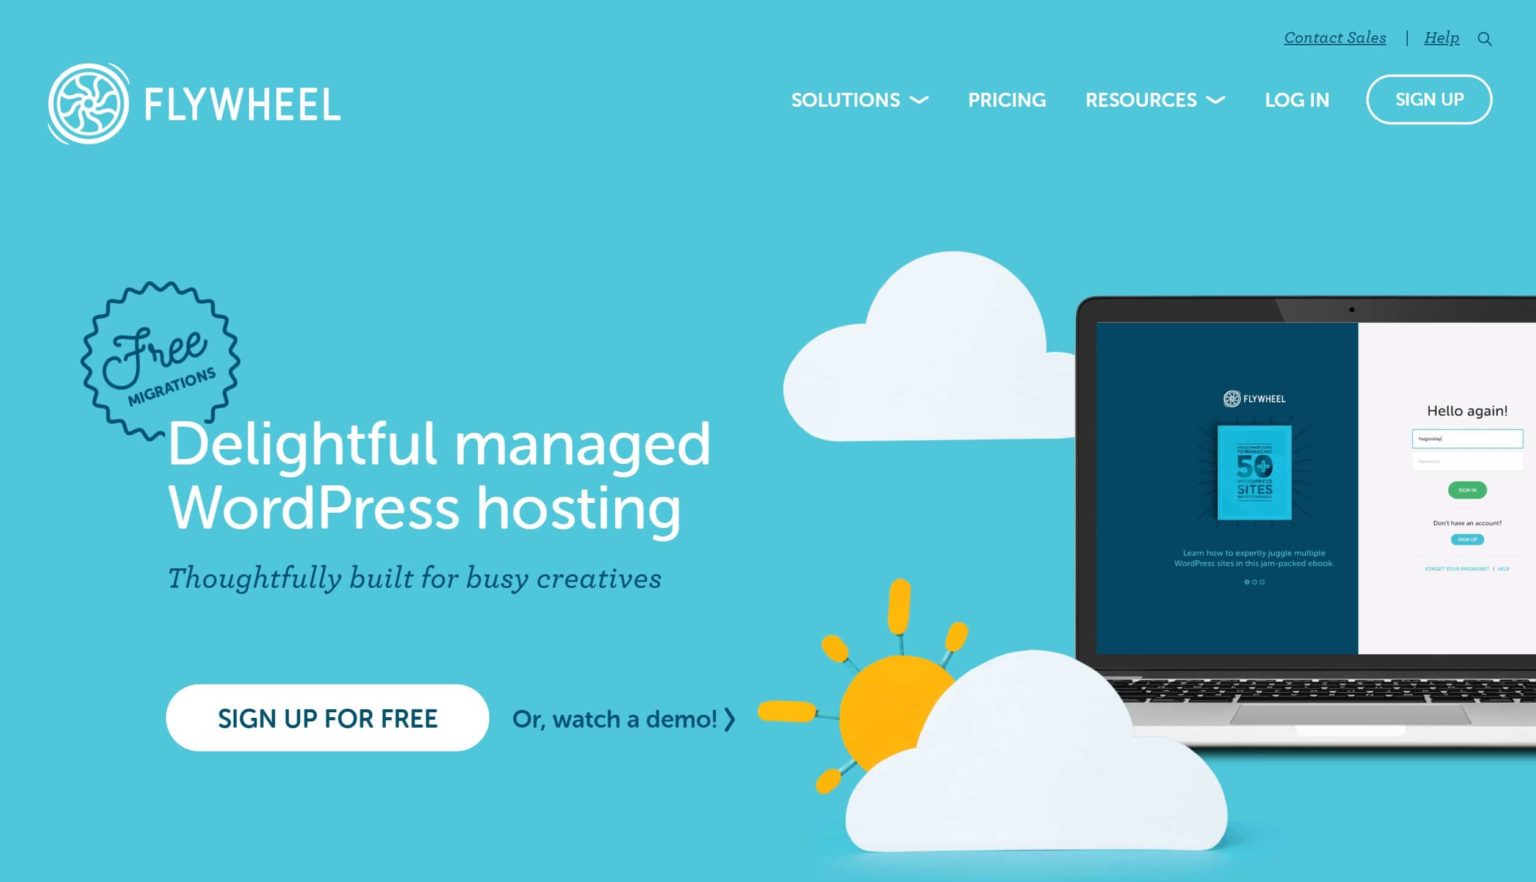 flywheel is one of the fastest managed hosting for WordPress sites